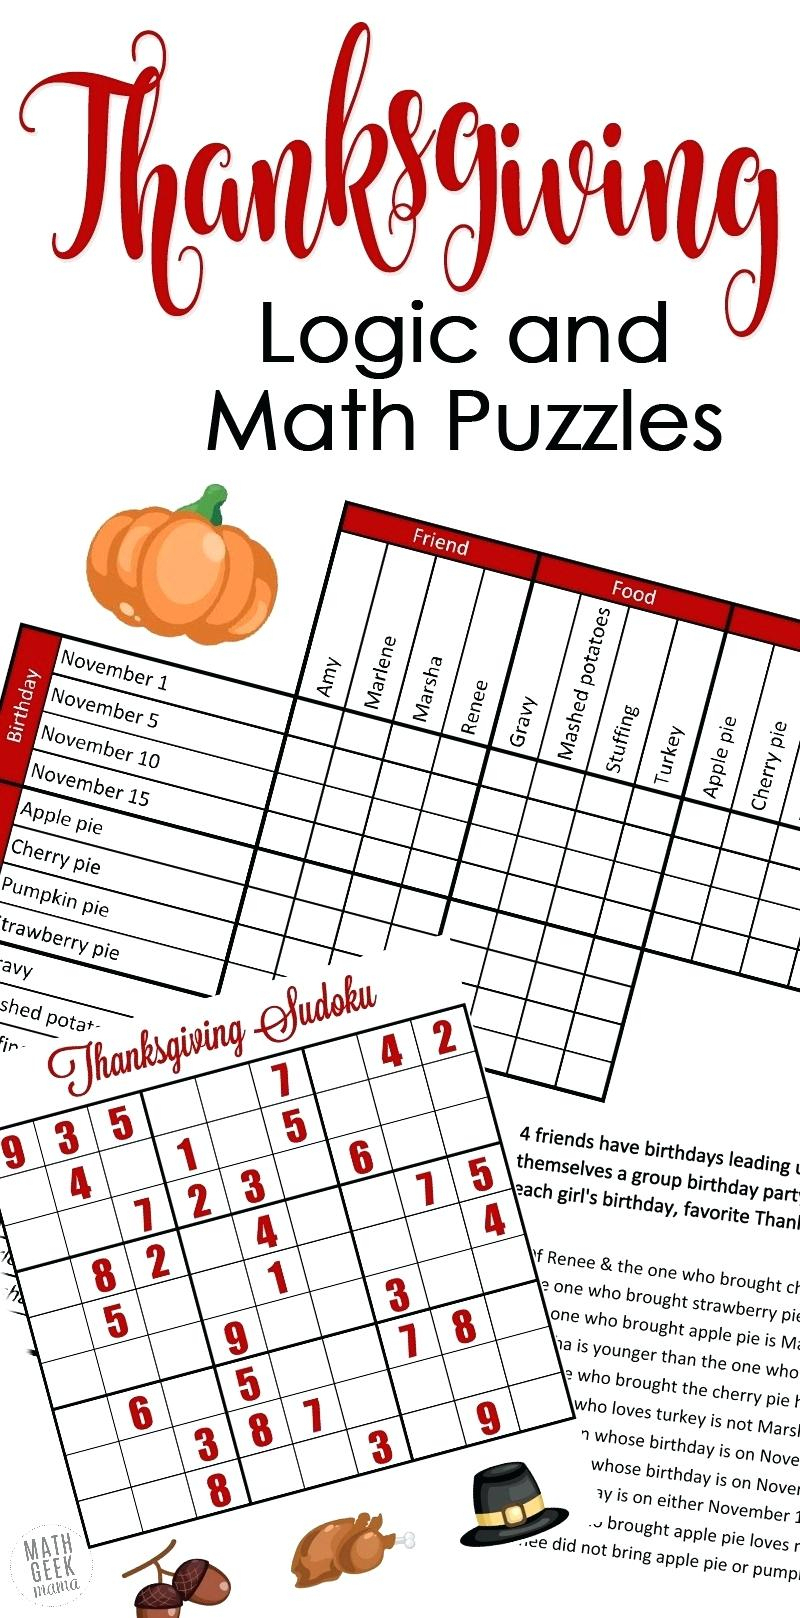 Logic Puzzles For High School It Logic Puzzles For High School - Printable Logic Puzzles Uk